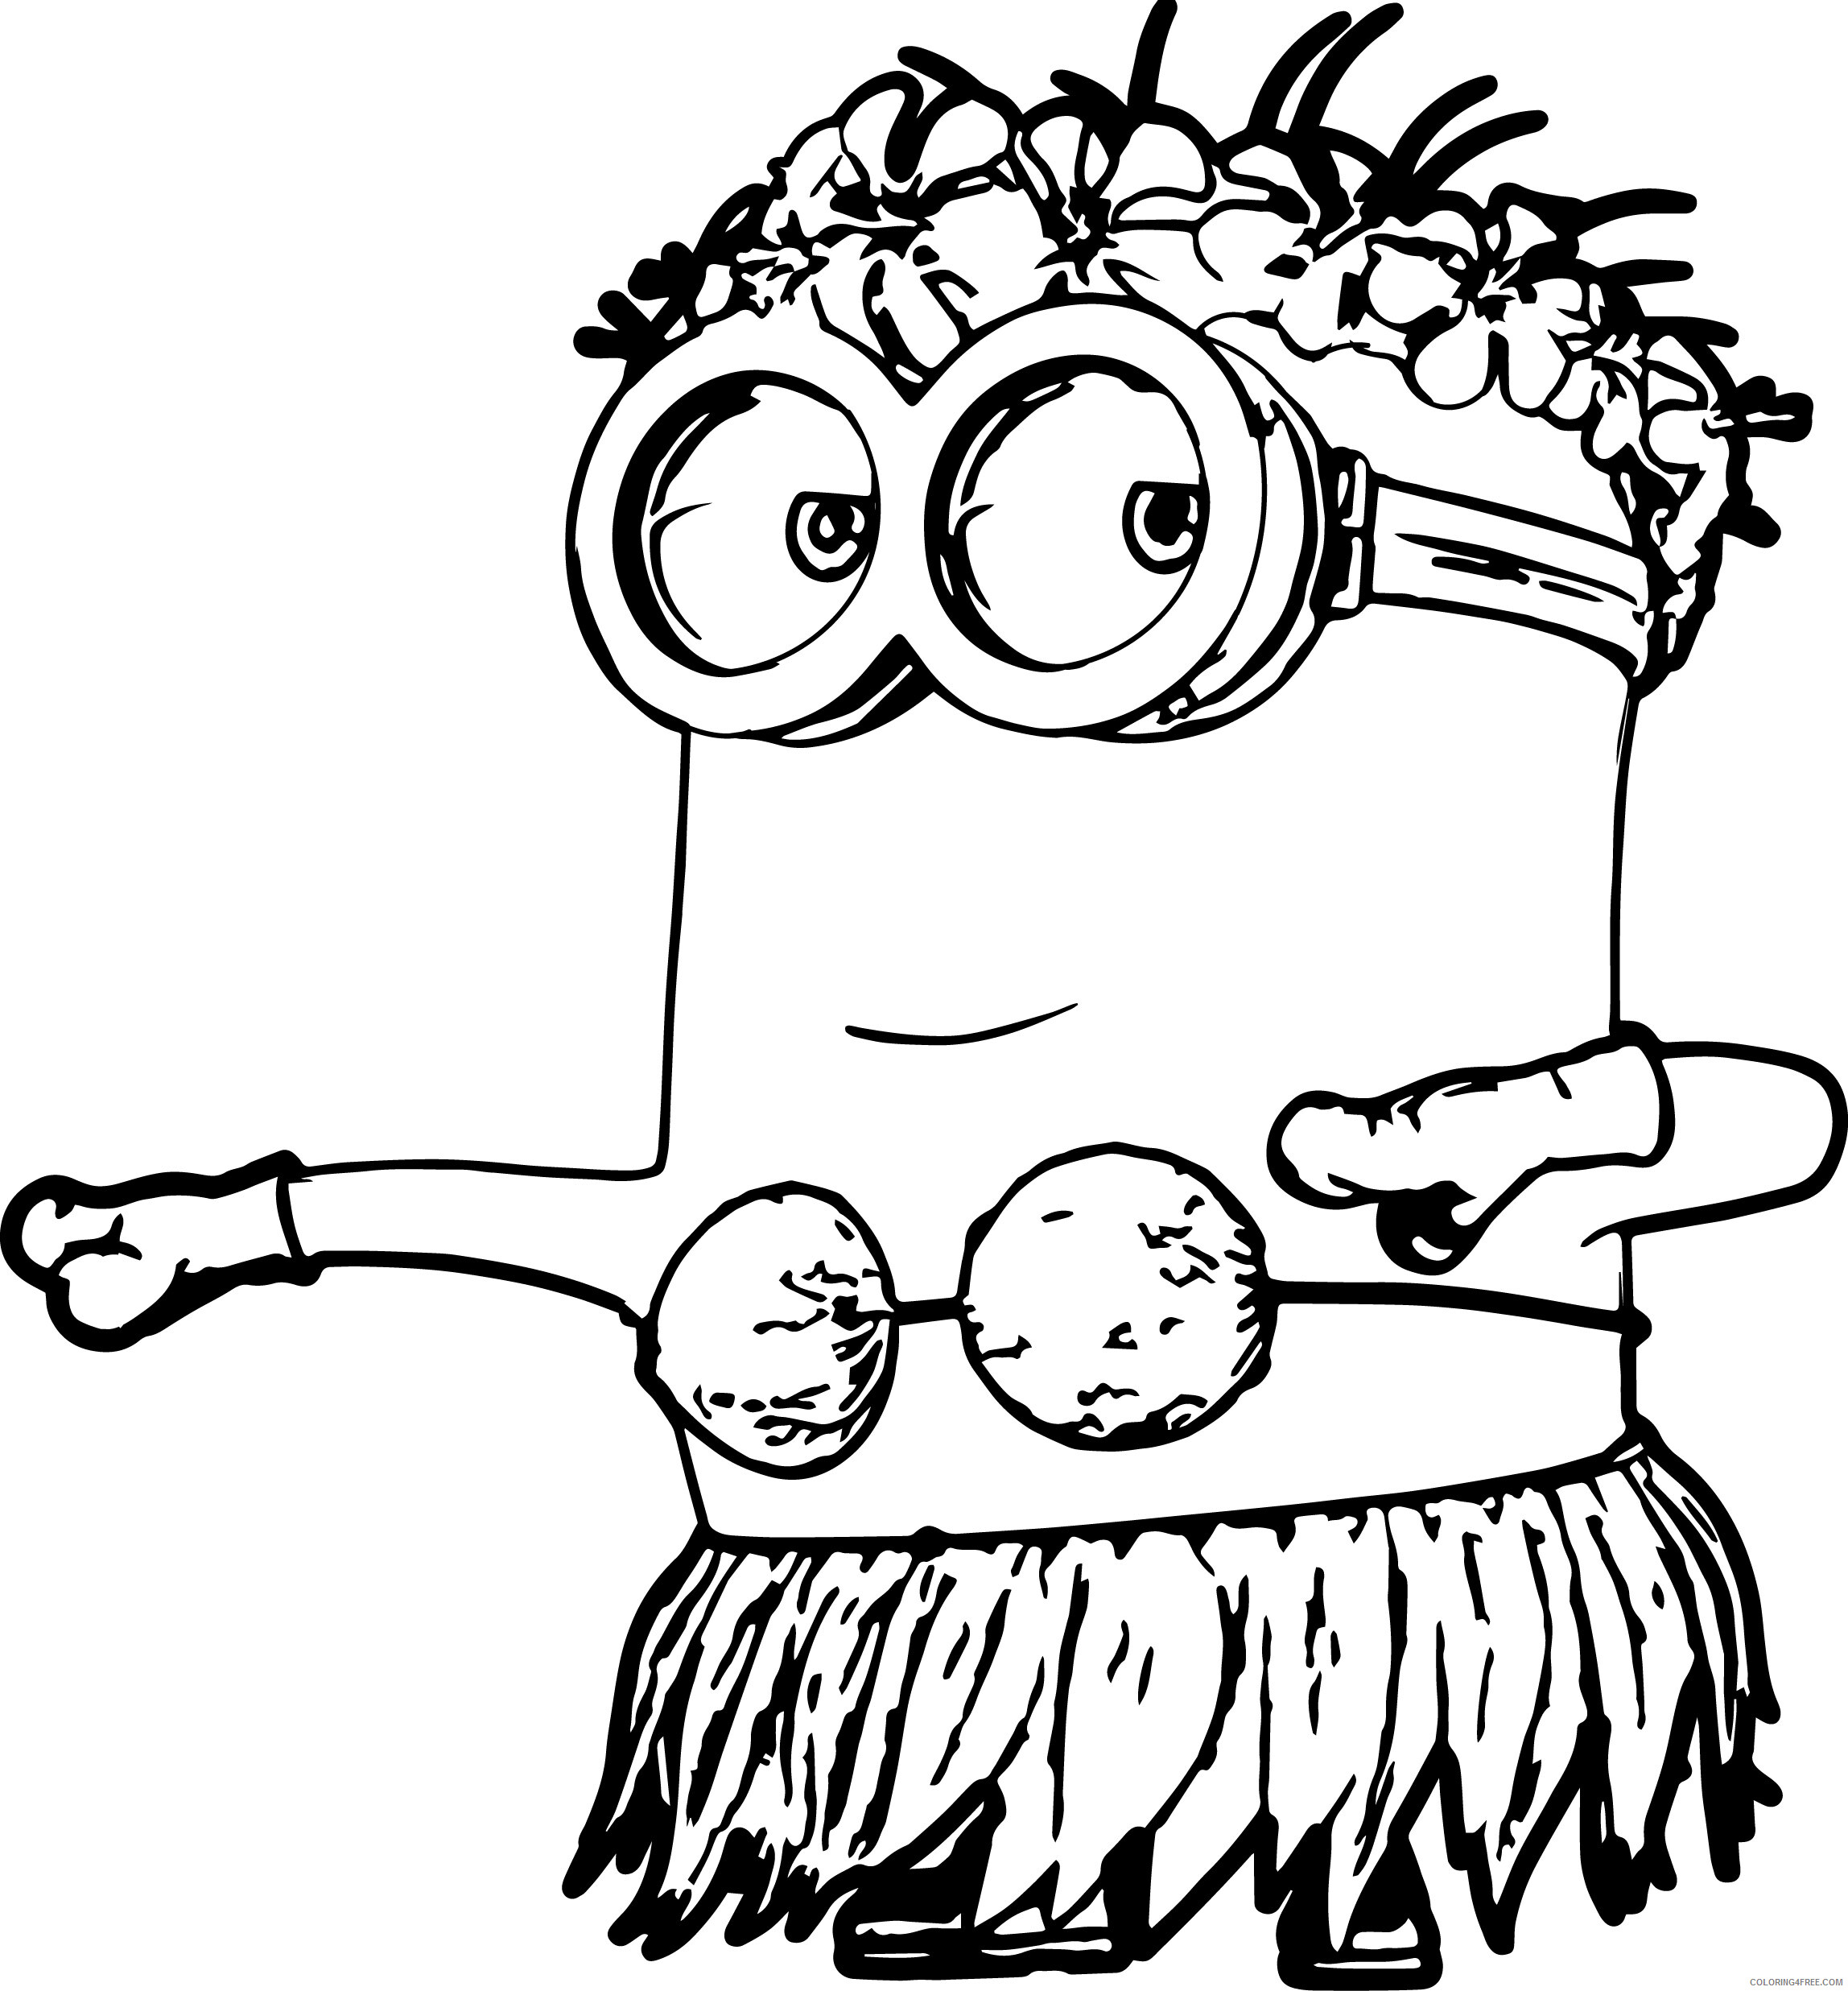 Minions Coloring Pages Tv Film Free Minions Printable 2020 05184 Coloring4free Coloring4free Com